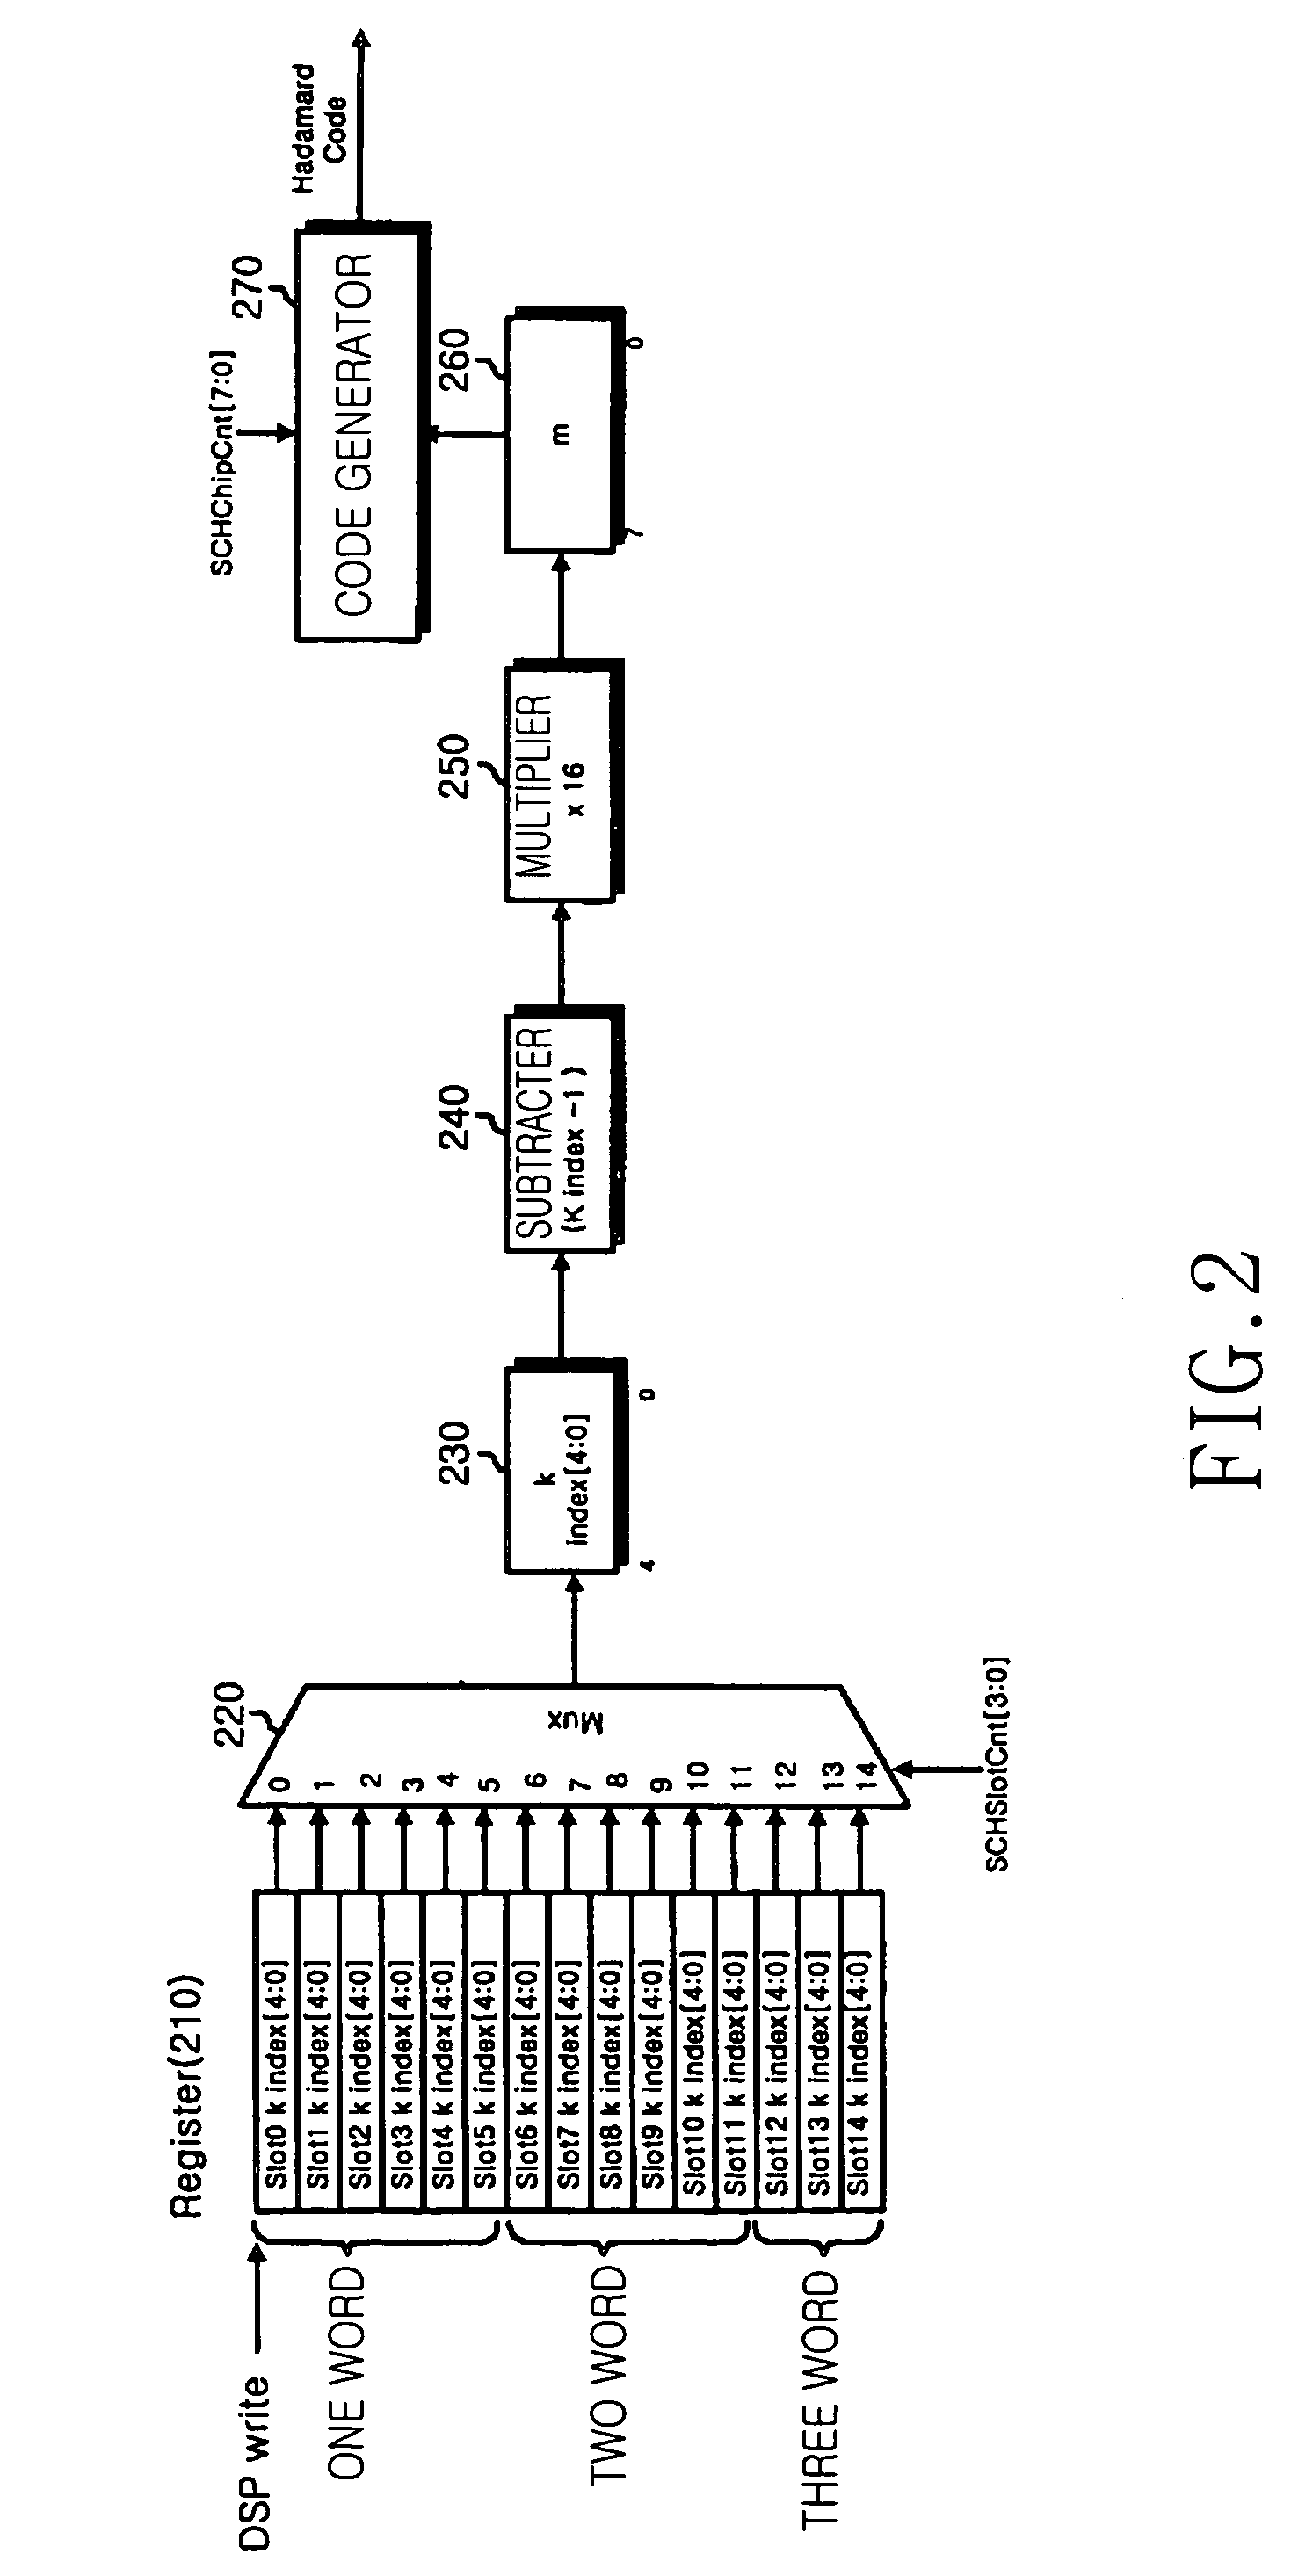 Method and apparatus for generating a code in an asynchronous code division multiple access mobile communication system